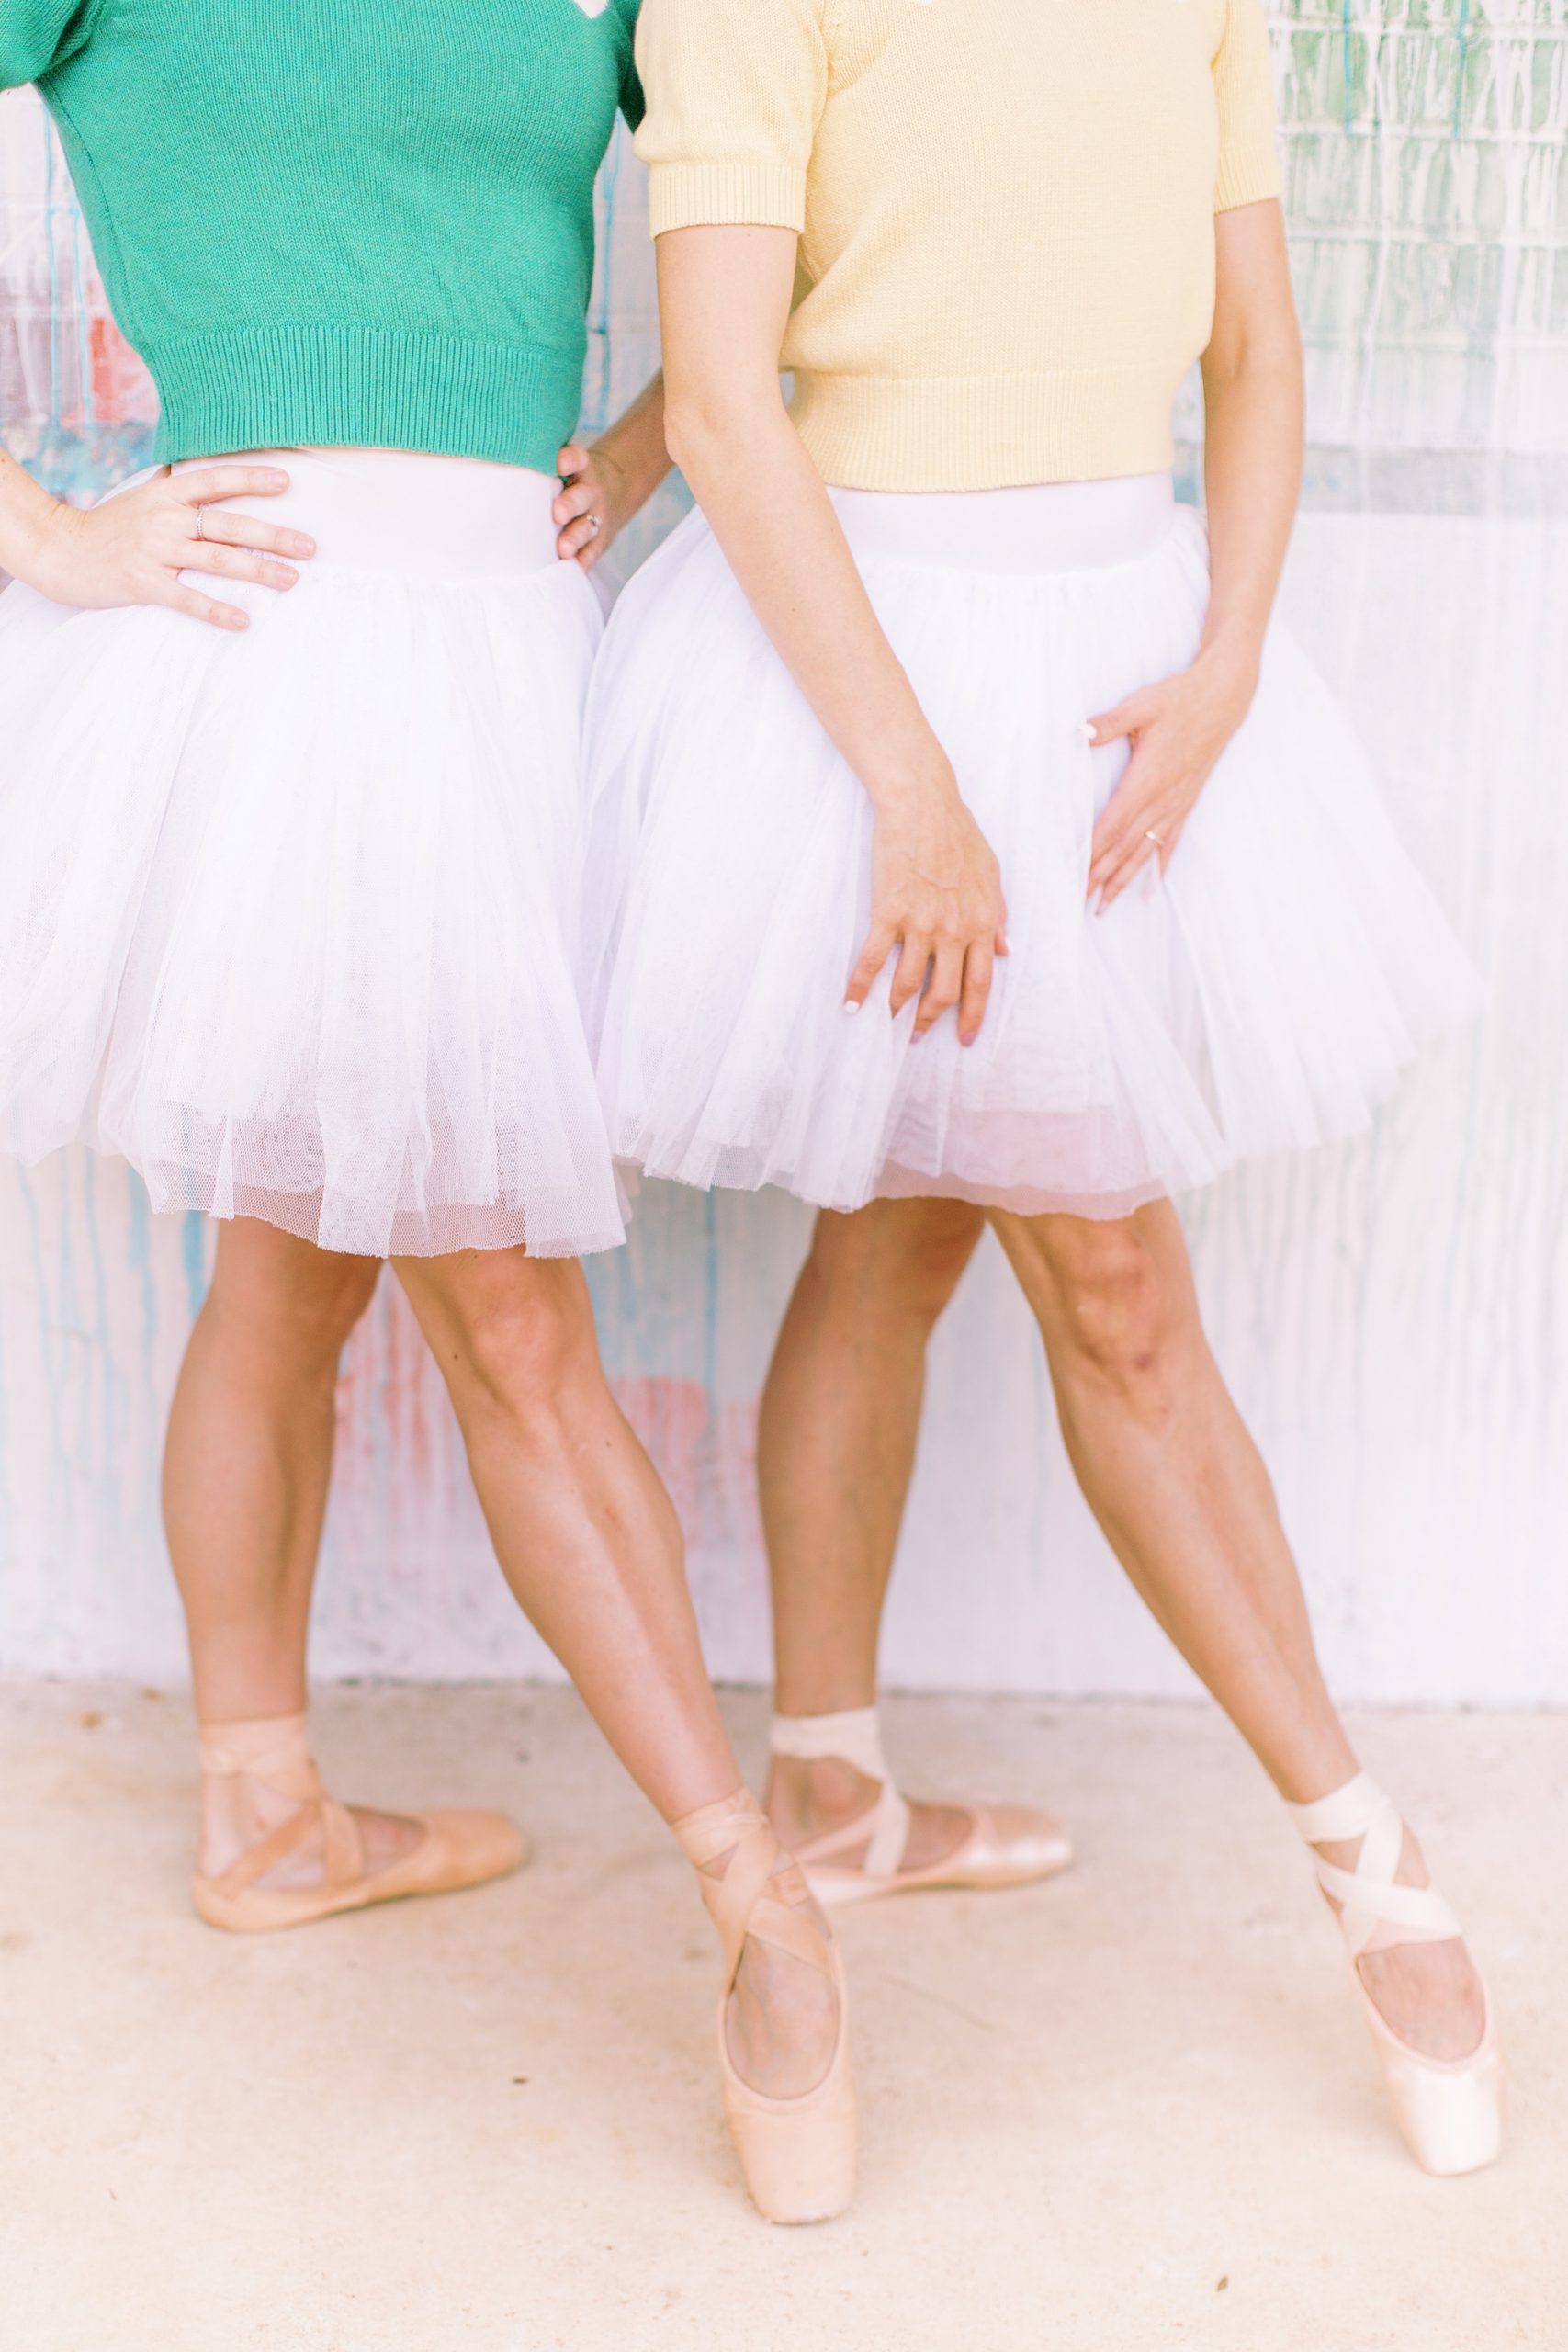 ballerinas point toes in pink tutus